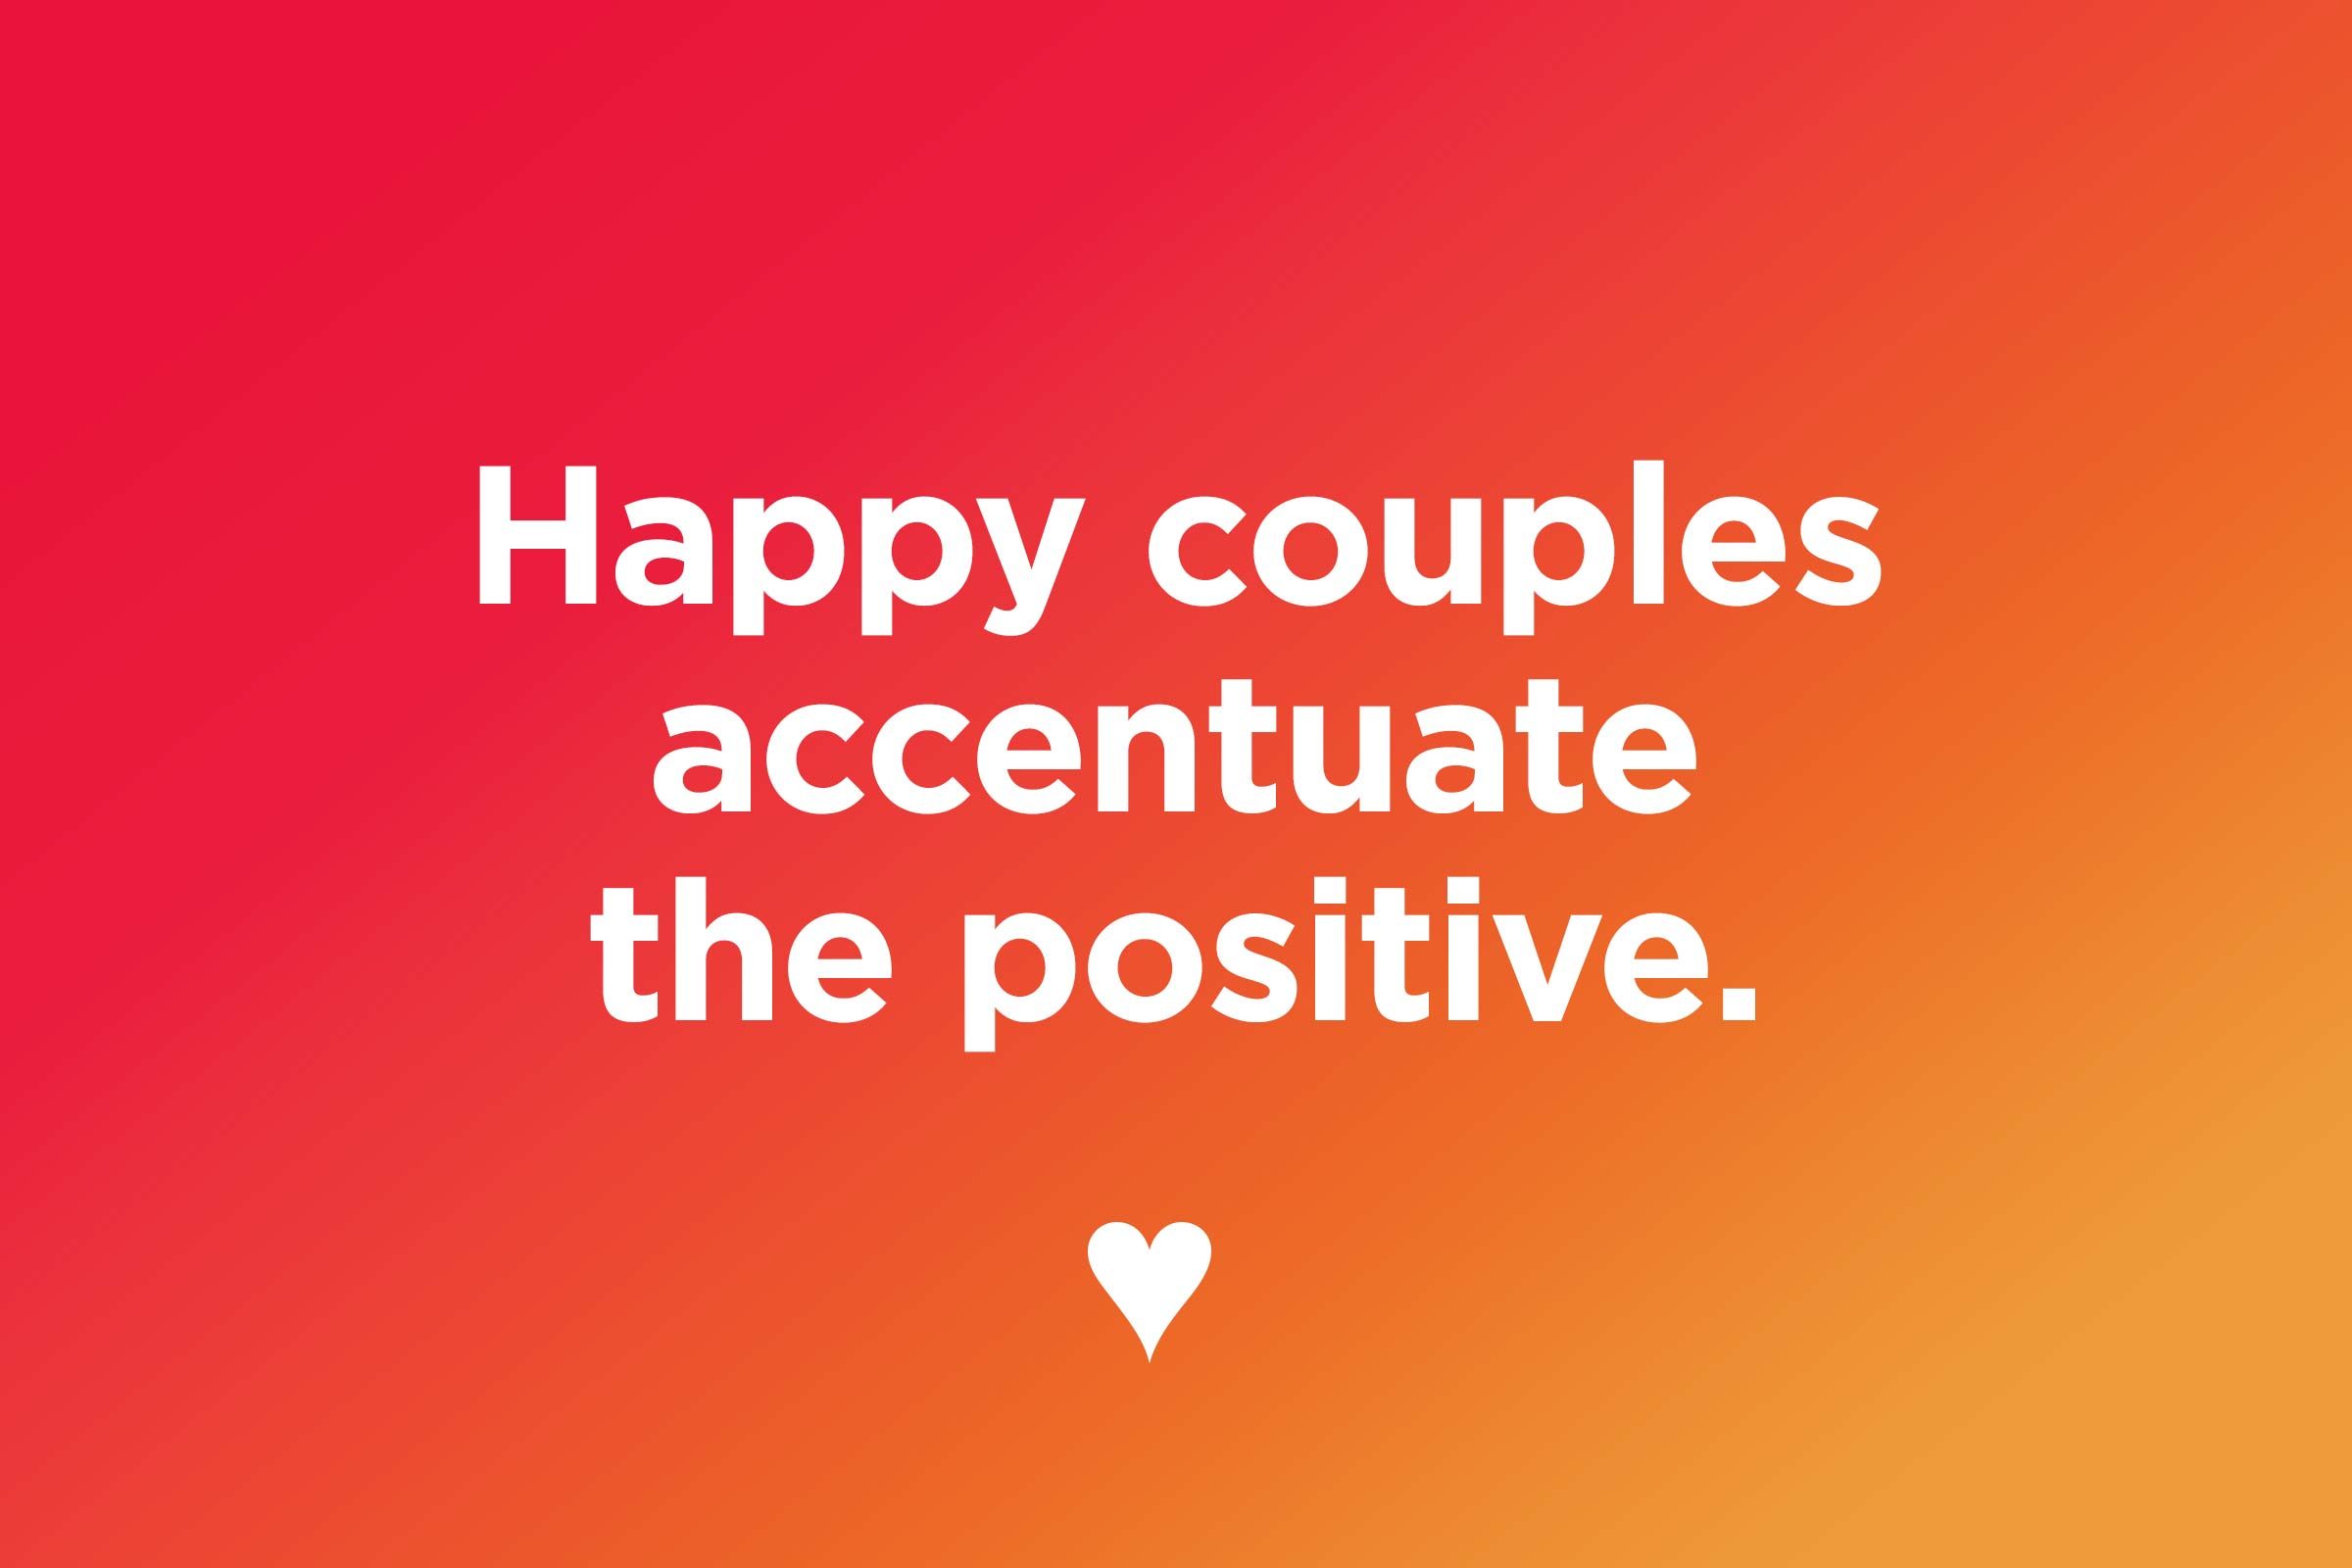 Happy couples accentuate the positive.